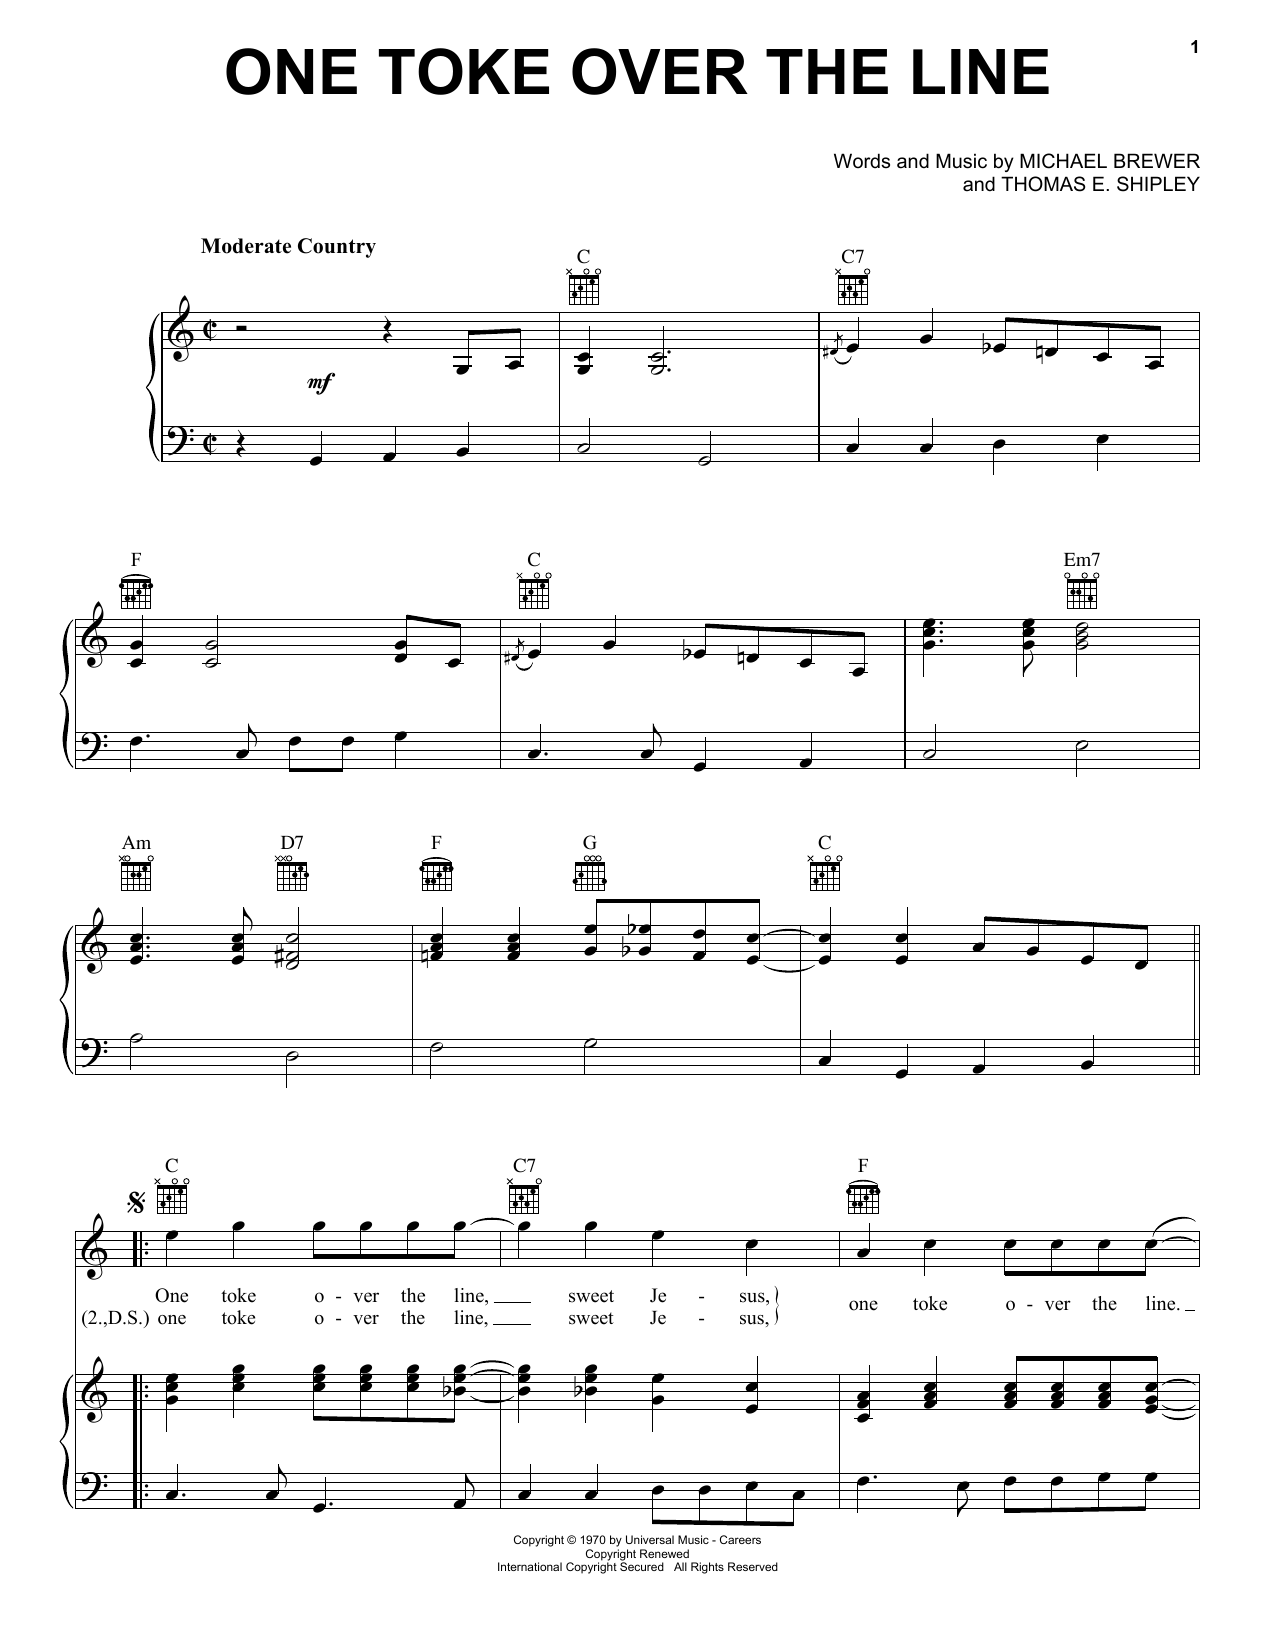 Download Brewer & Shipley One Toke Over The Line Sheet Music